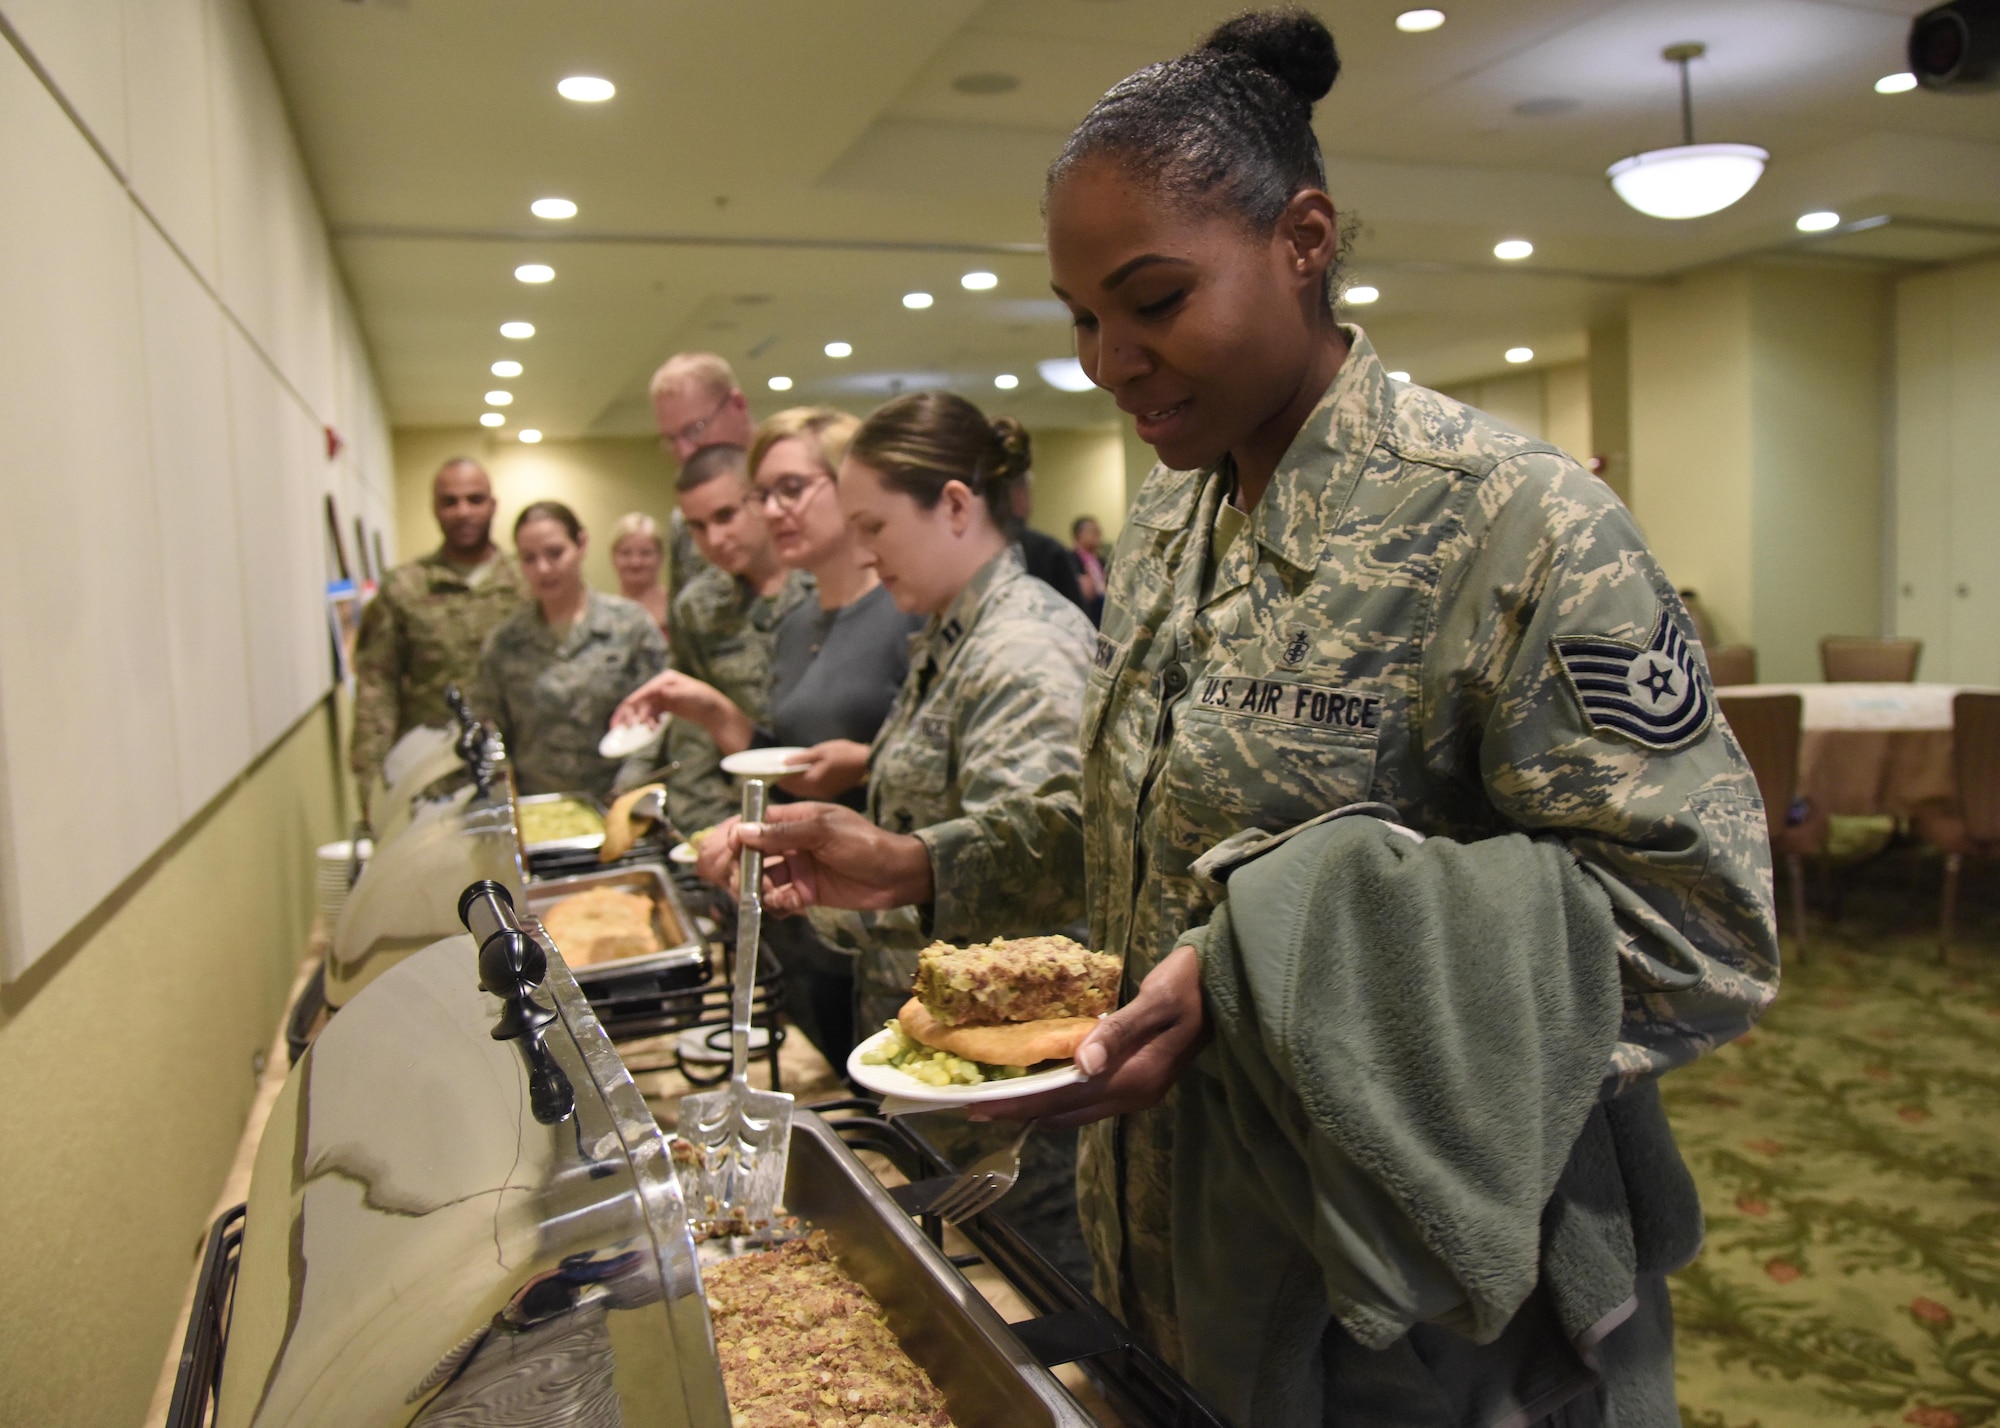 U.S. Air Force Tech. Sgt. Esi Jackson, 81st Dental Squadron dental logistics NCO in charge, places a serving of poyha, a venison dish handed down from the Cherokee tribe, on her plate during the Native American Heritage Month Food Tasting at Keesler Air Force Base, Mississippi, Nov. 29, 2018. The event was held in celebration of Native American Heritage Month. (U.S. Air Force photo by Kemberly Groue)